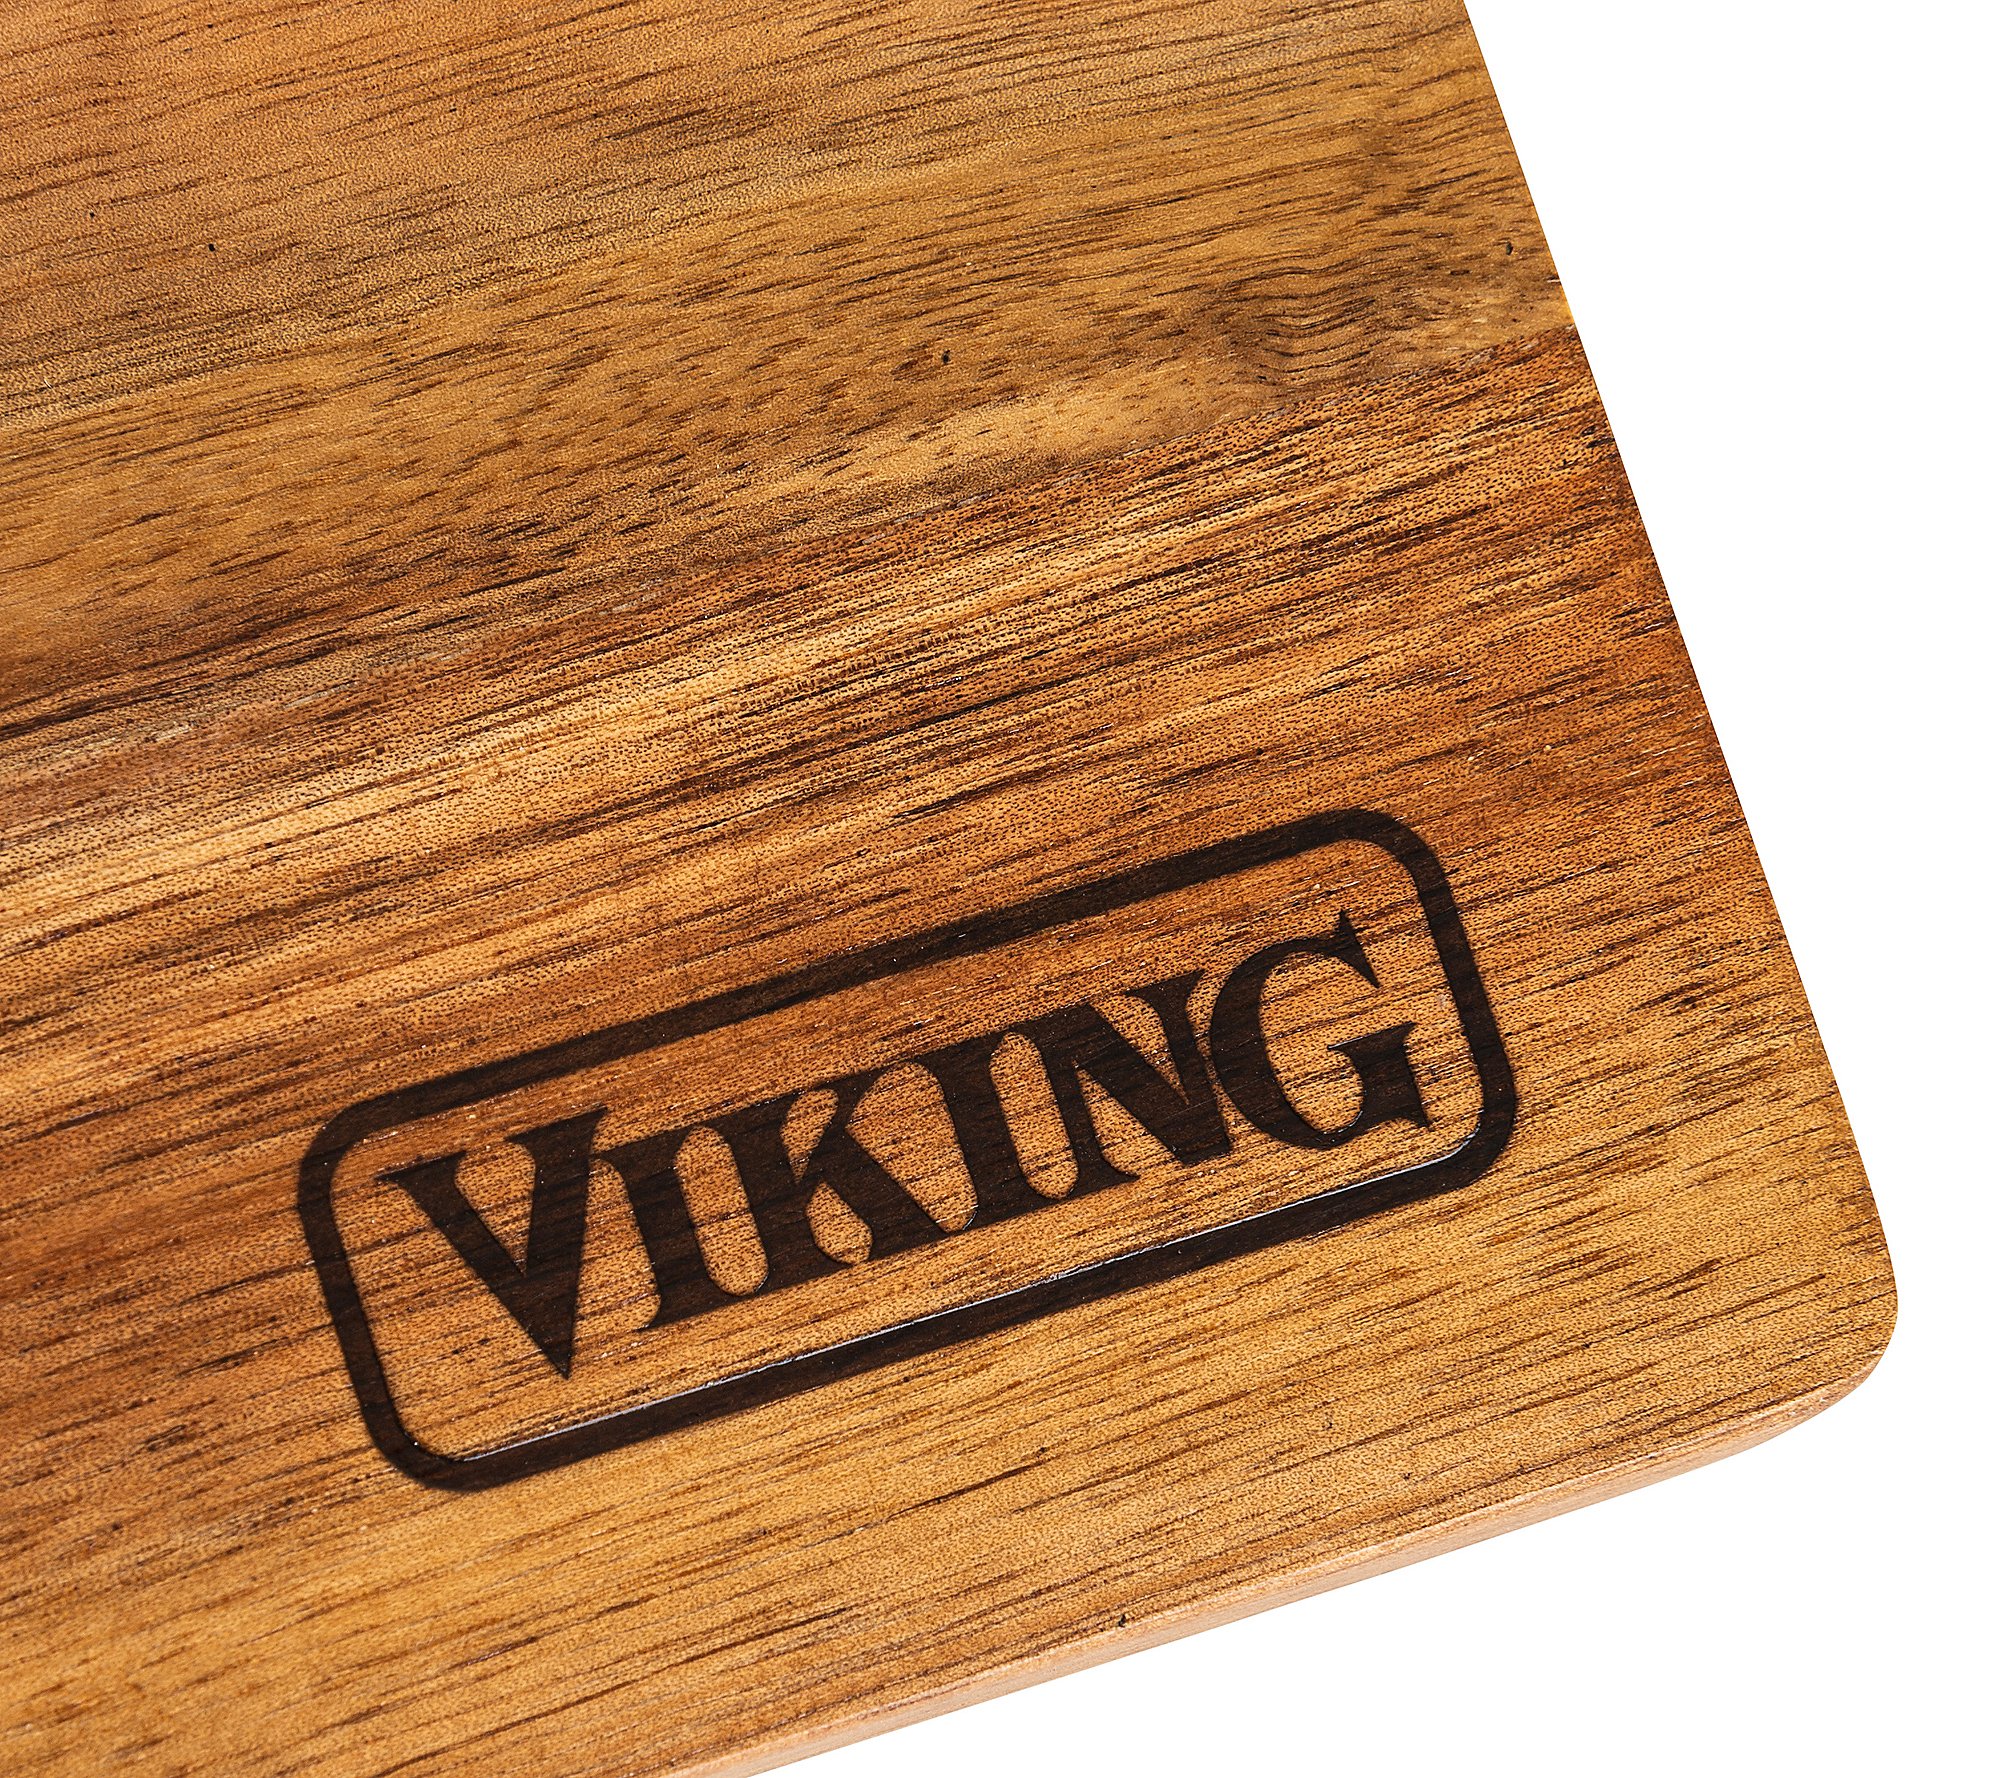 Viking Acacia 2-Piece Paddle and Cutting BoardServing Set